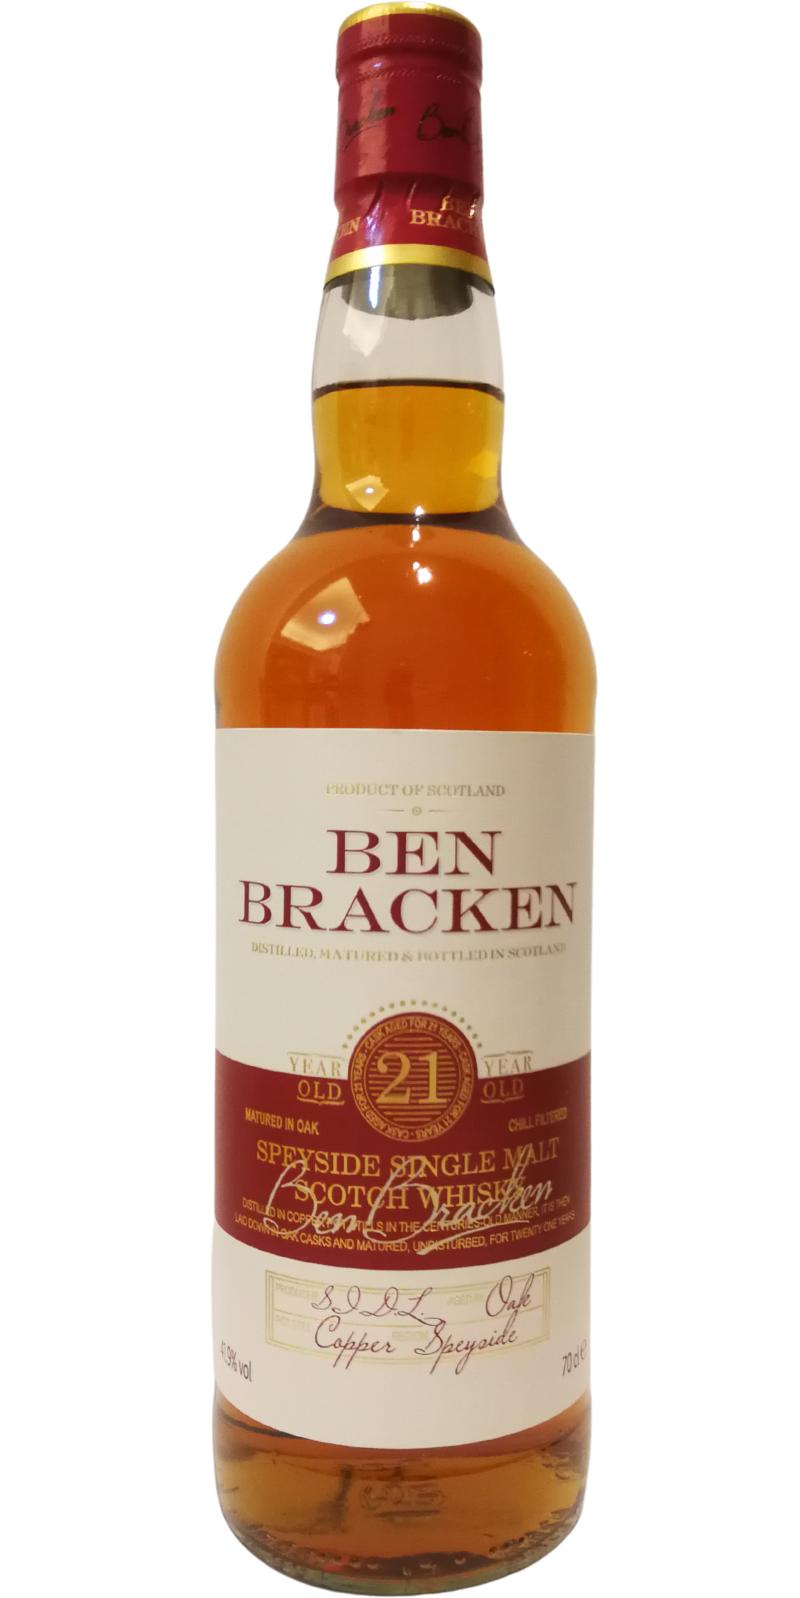 Ben Bracken 21-year-old TSID - Ratings and reviews - Whiskybase